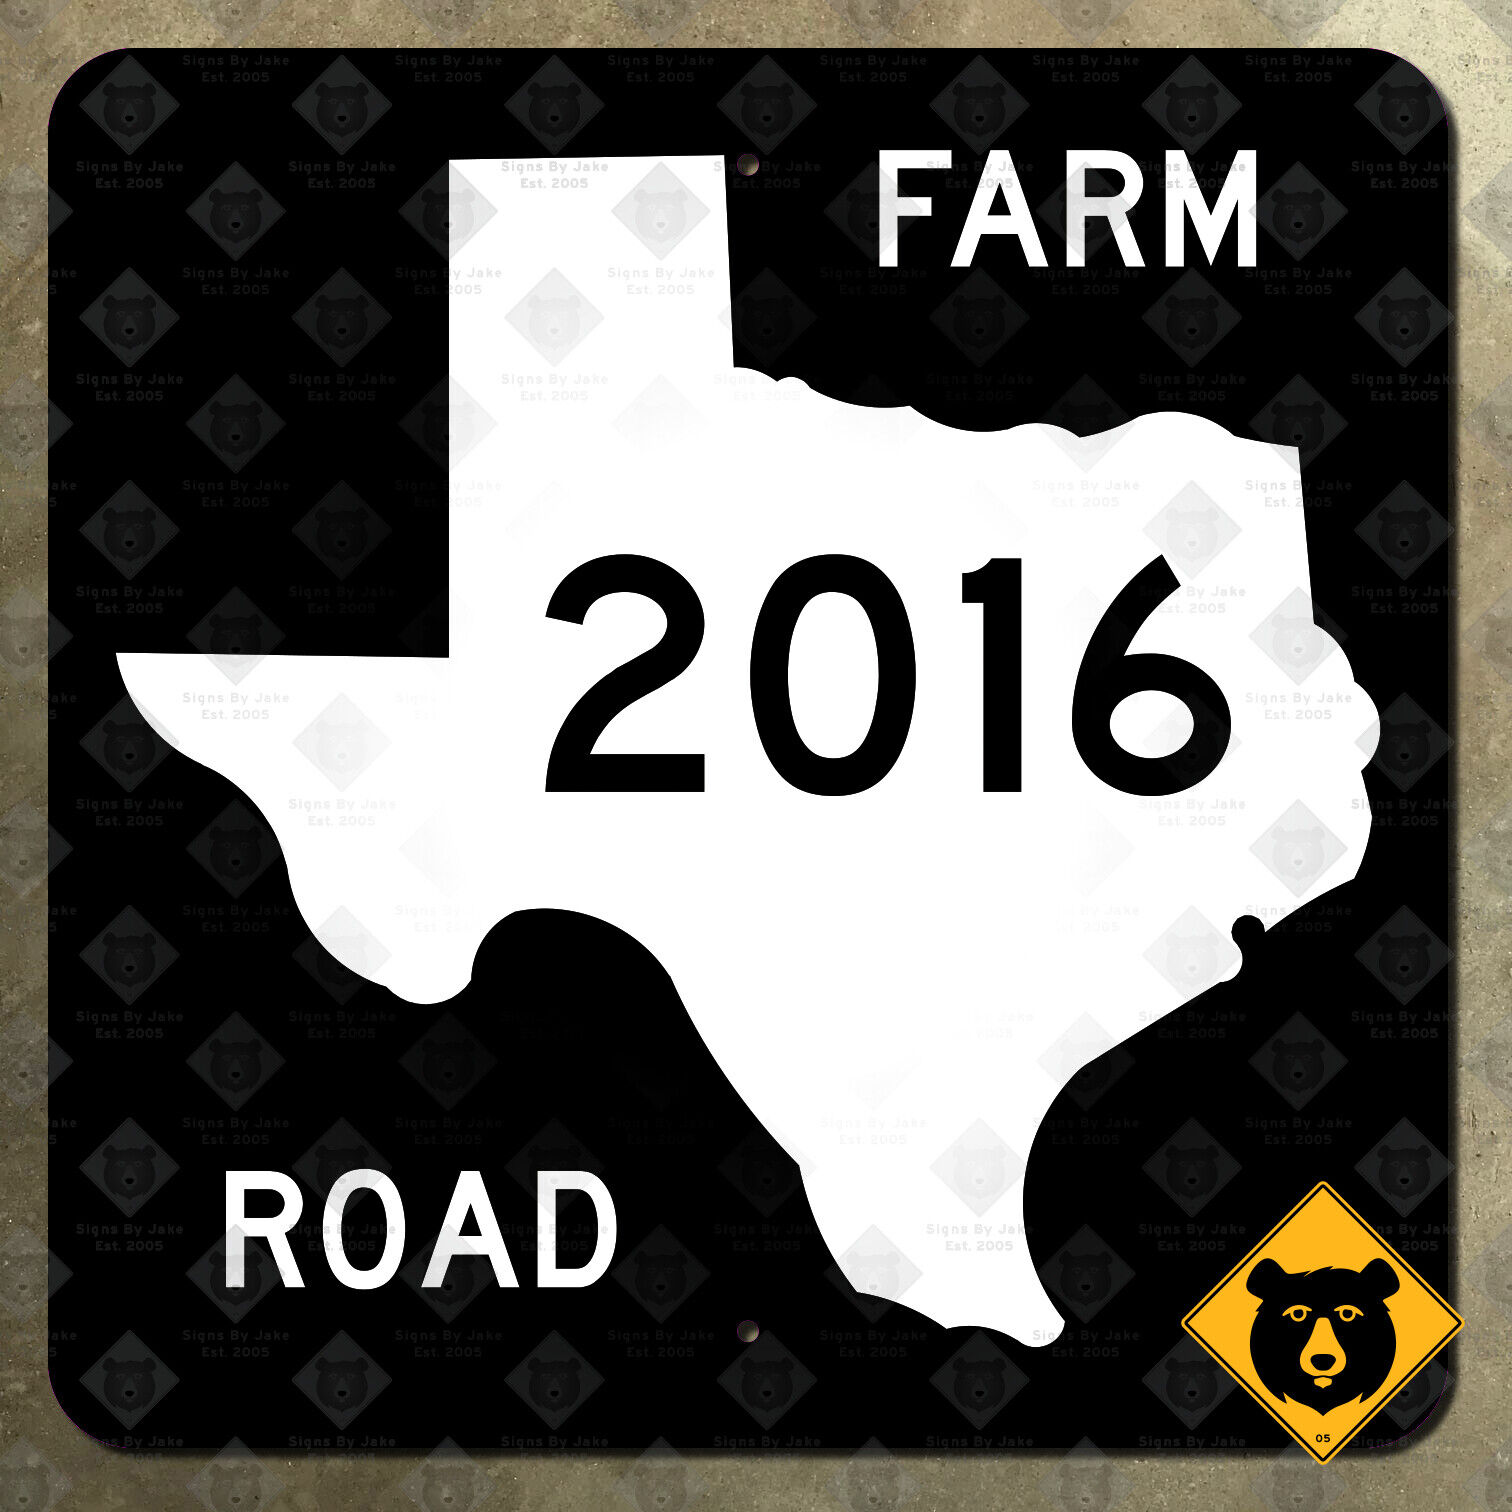 Texas farm to market road 2016 state highway marker route sign map 1965 16x16